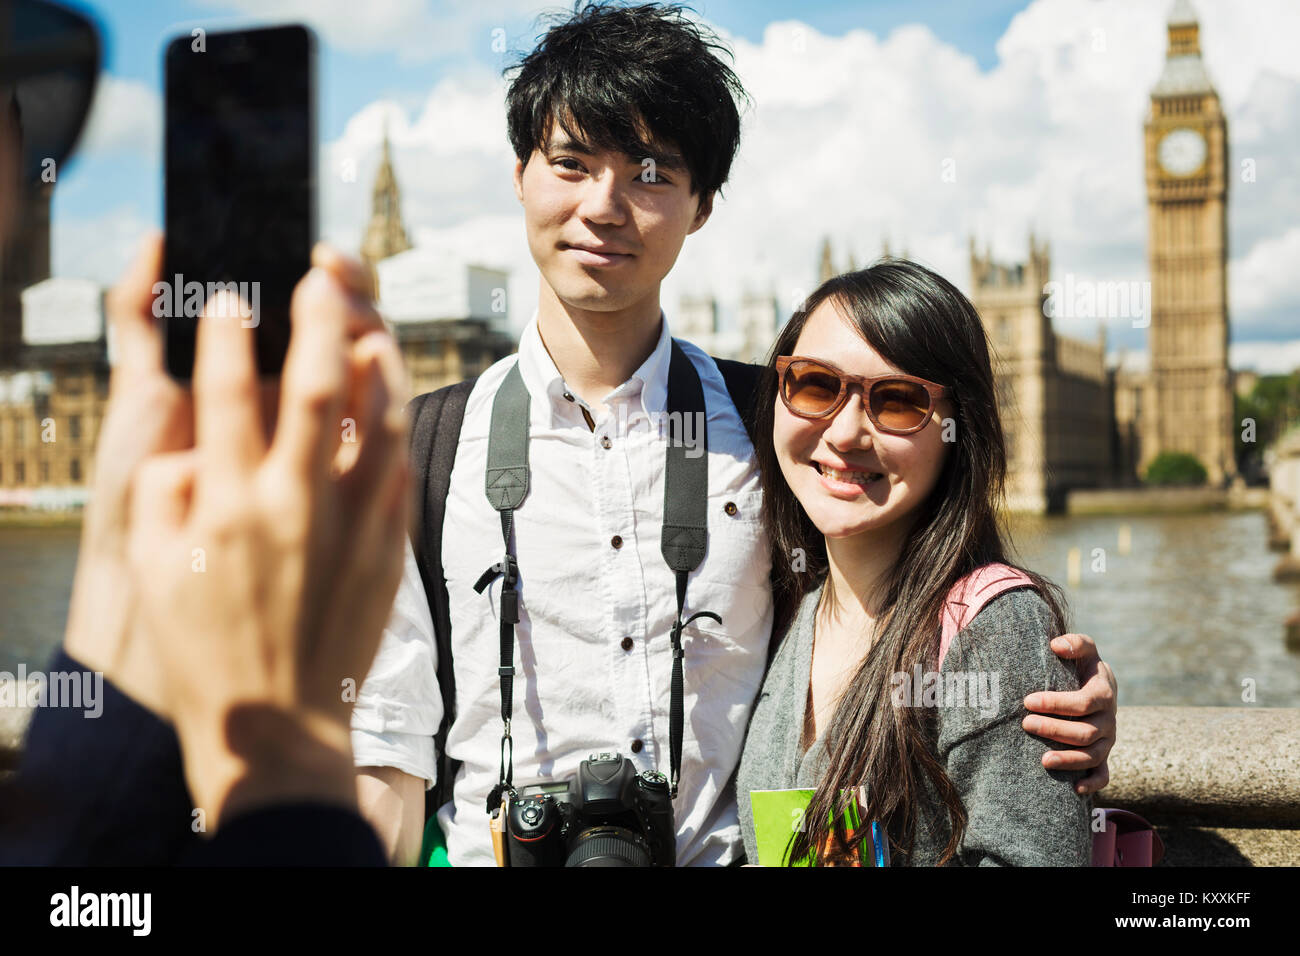 Smiling woman with black hair taking picture of couple with smartphone, standing on Westminster Bridge over the River Thames, London, with the Houses  Stock Photo